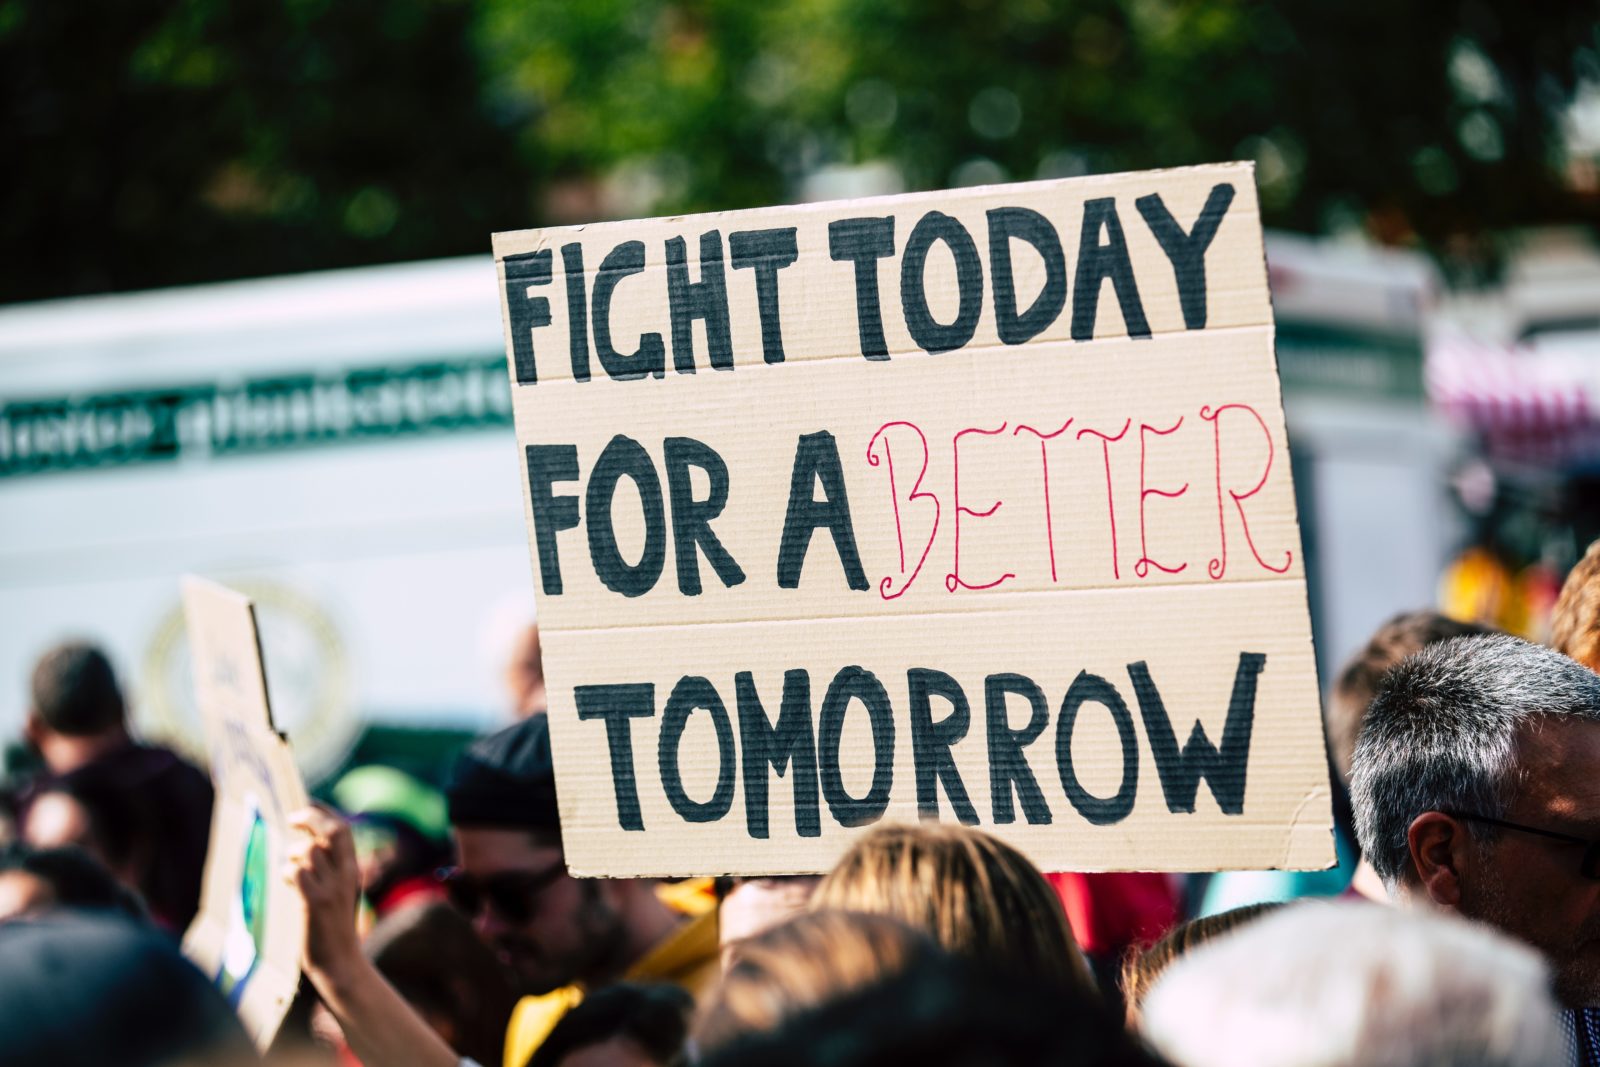 protest sign: "fight today for a better tomorrow"